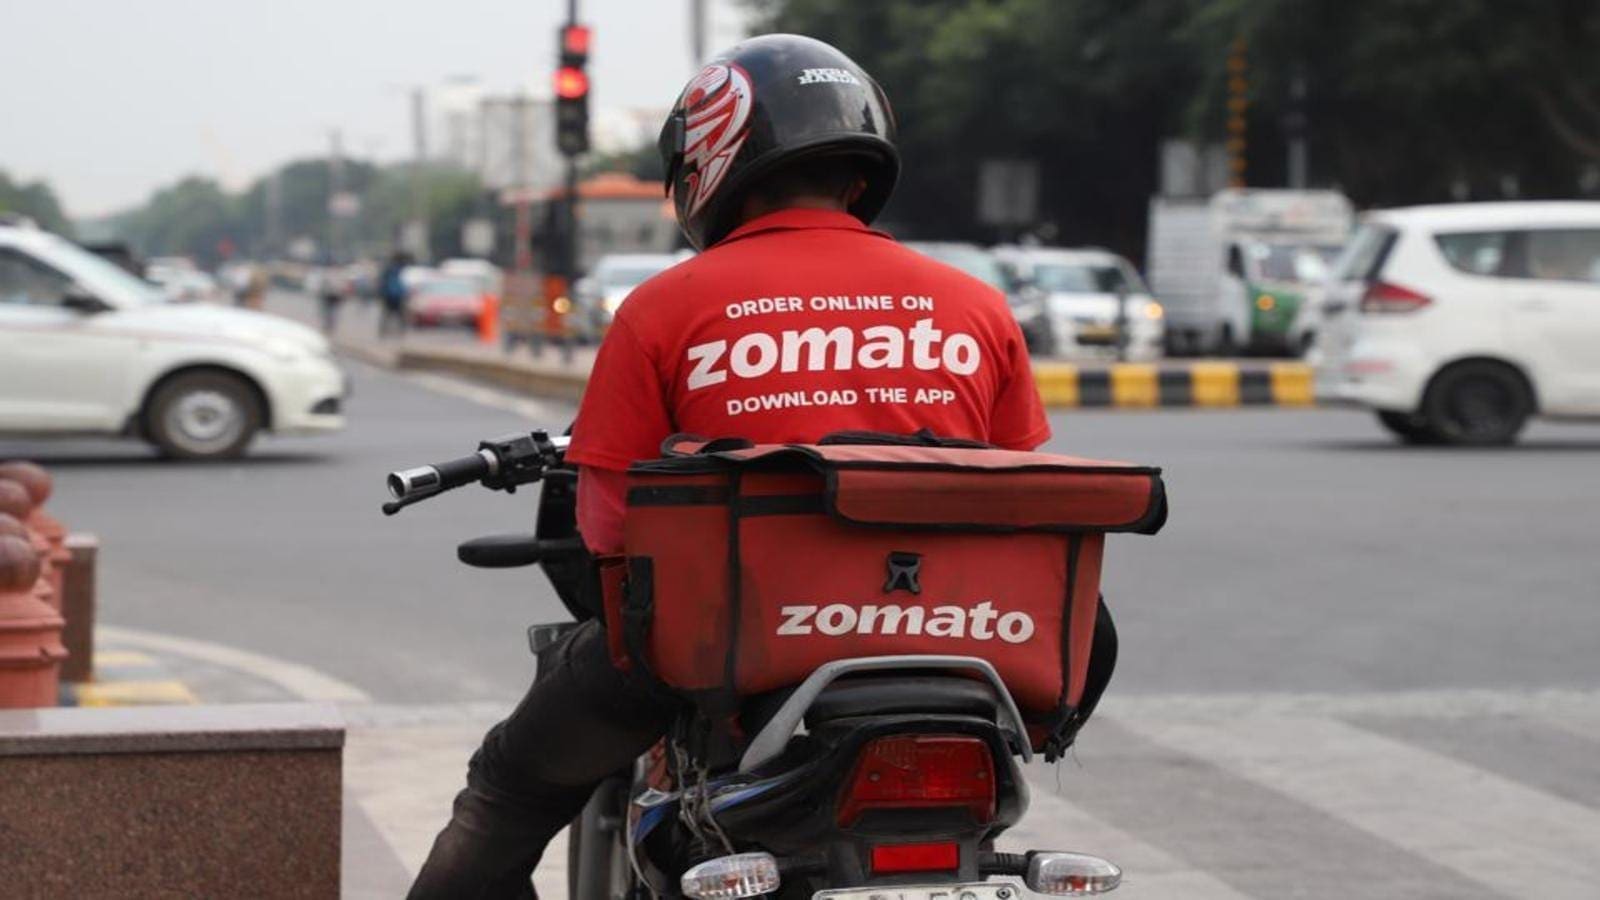 Zomato to invest US$1B over the next 2 years to accelerate growth of Indian startups